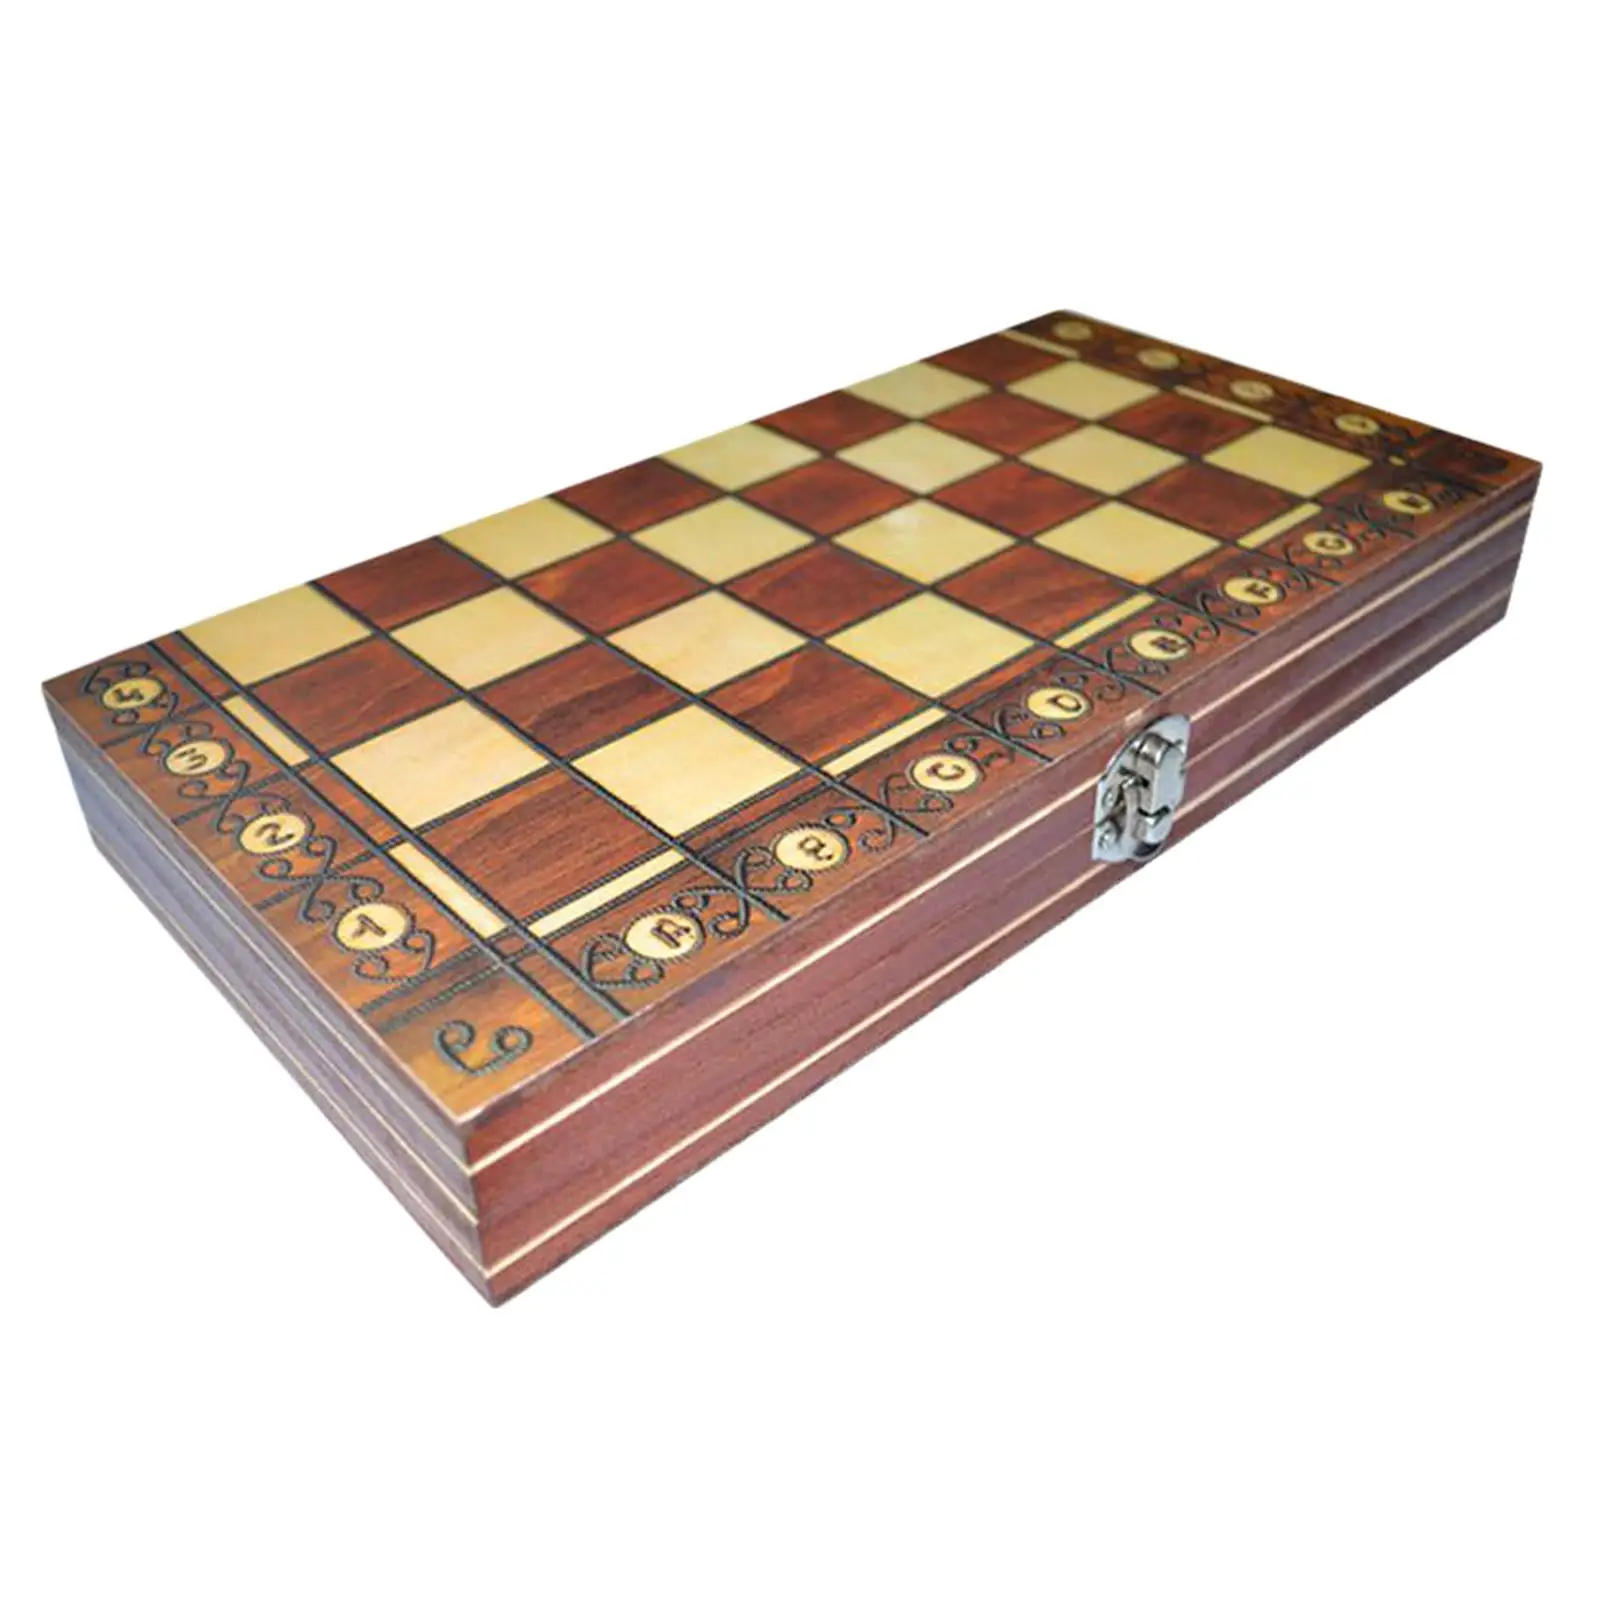 Kids Wooden Chess Backgammon Checkers 3 in 1 Chess Game Toy Set 39cm